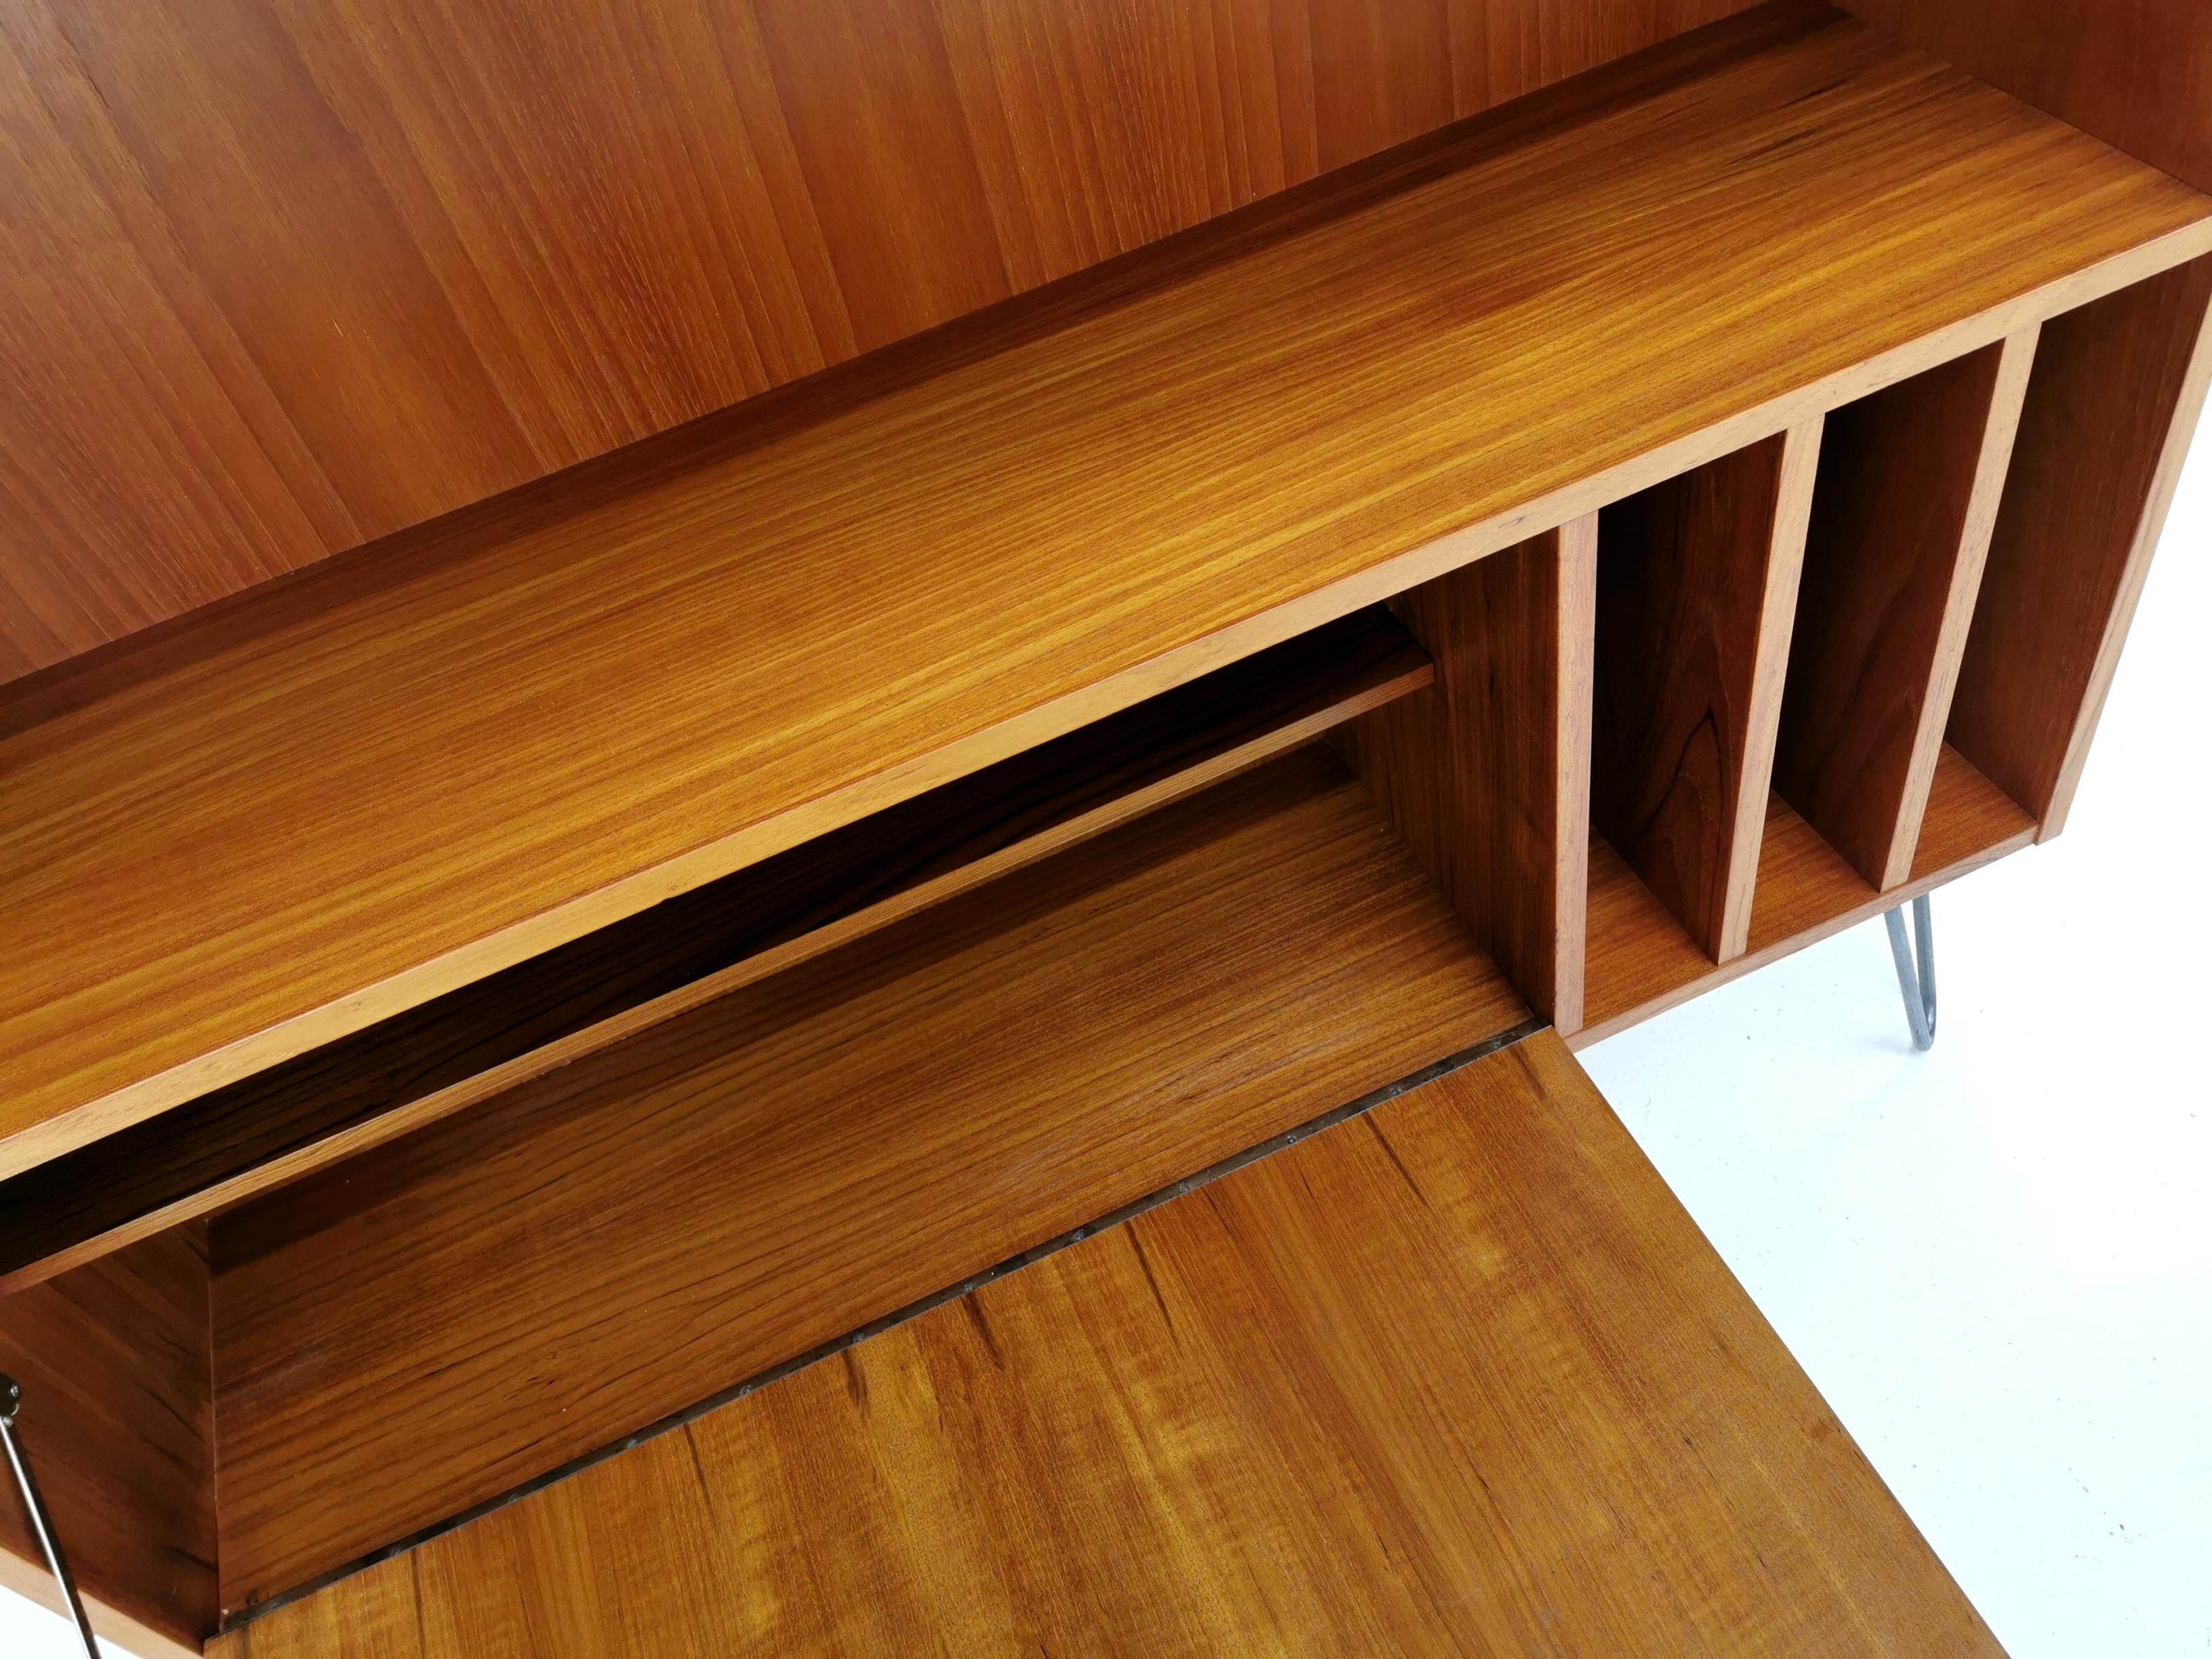 Clausen & Søn teak bookcase

Bookcase raised on hairpin legs. 

Top-quality, made in Denmark. 

Teak. Featuring a fall front cabinet. Spaces for books and records.

Midcentury, 1970s by Clausen & Son. 

Dimensions (cm): H 124 x W 104 x D